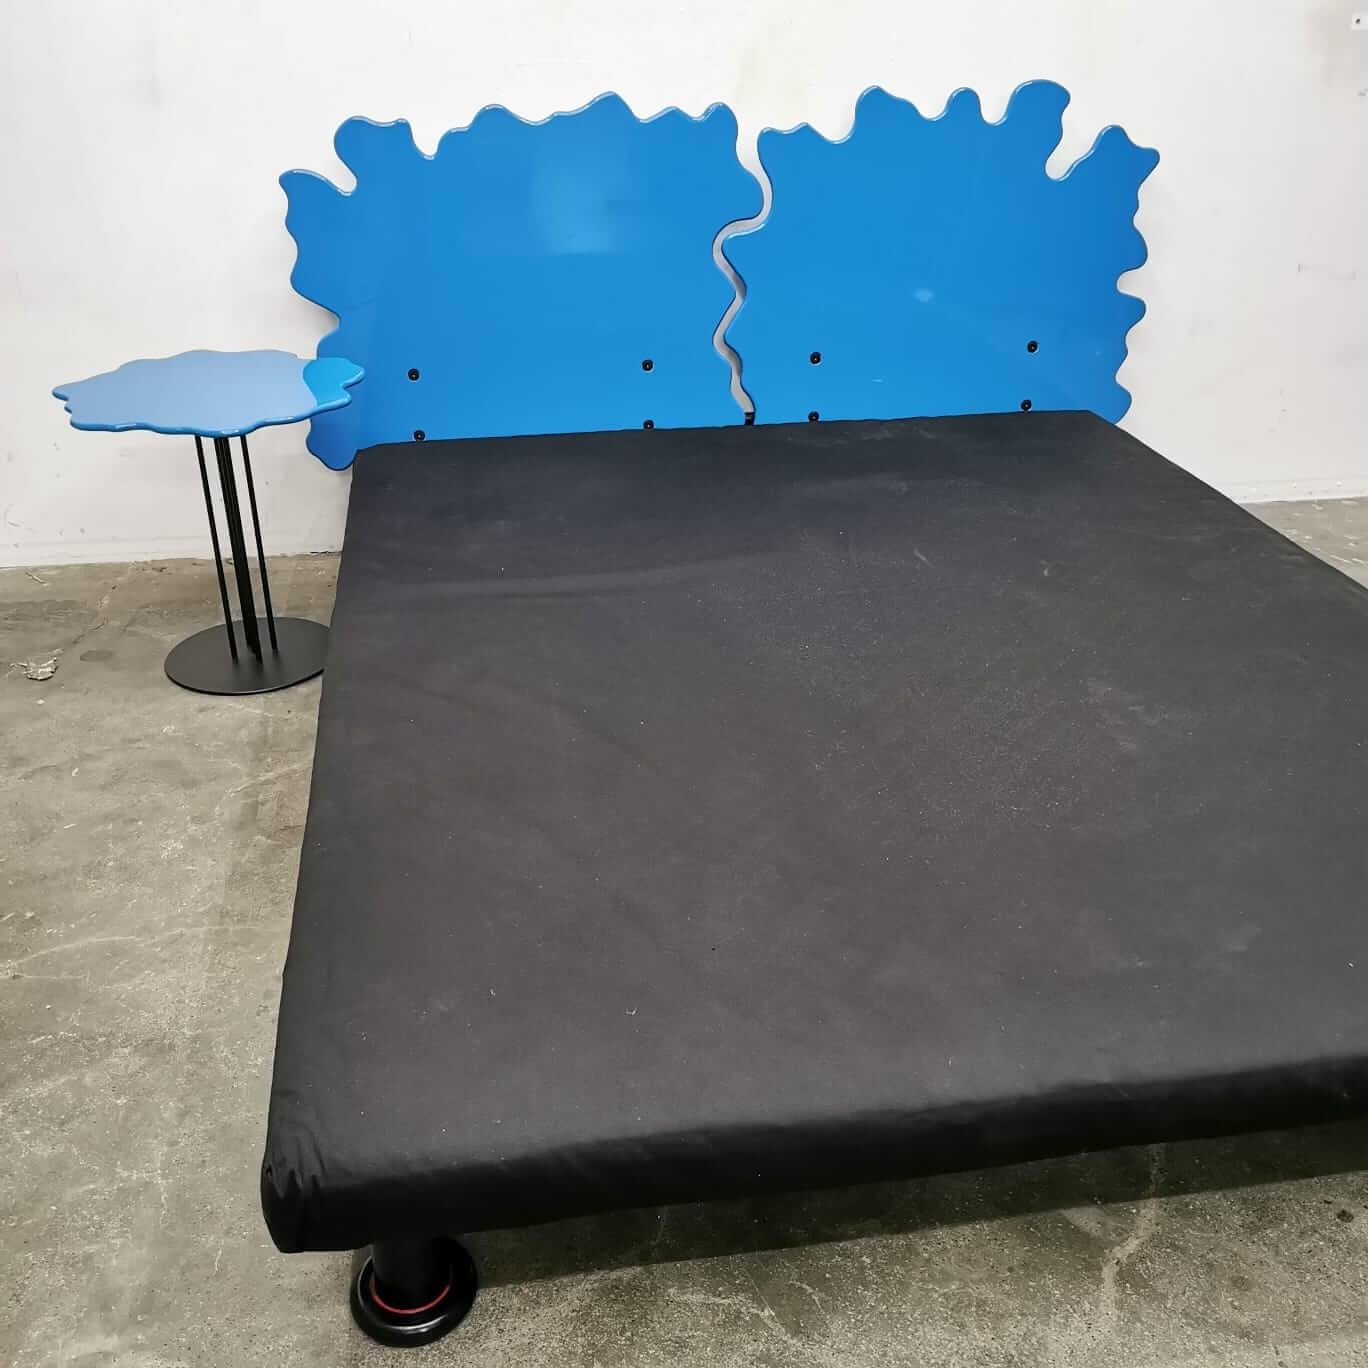 Bed designed in the 1980s by Giovanni Ronzoni for Interflex. The bed's jagged headboard colored with this bright blue clearly demonstrates its intent to belong to the colorful experimentation of Italian postmodernism. Belonging to an Italian